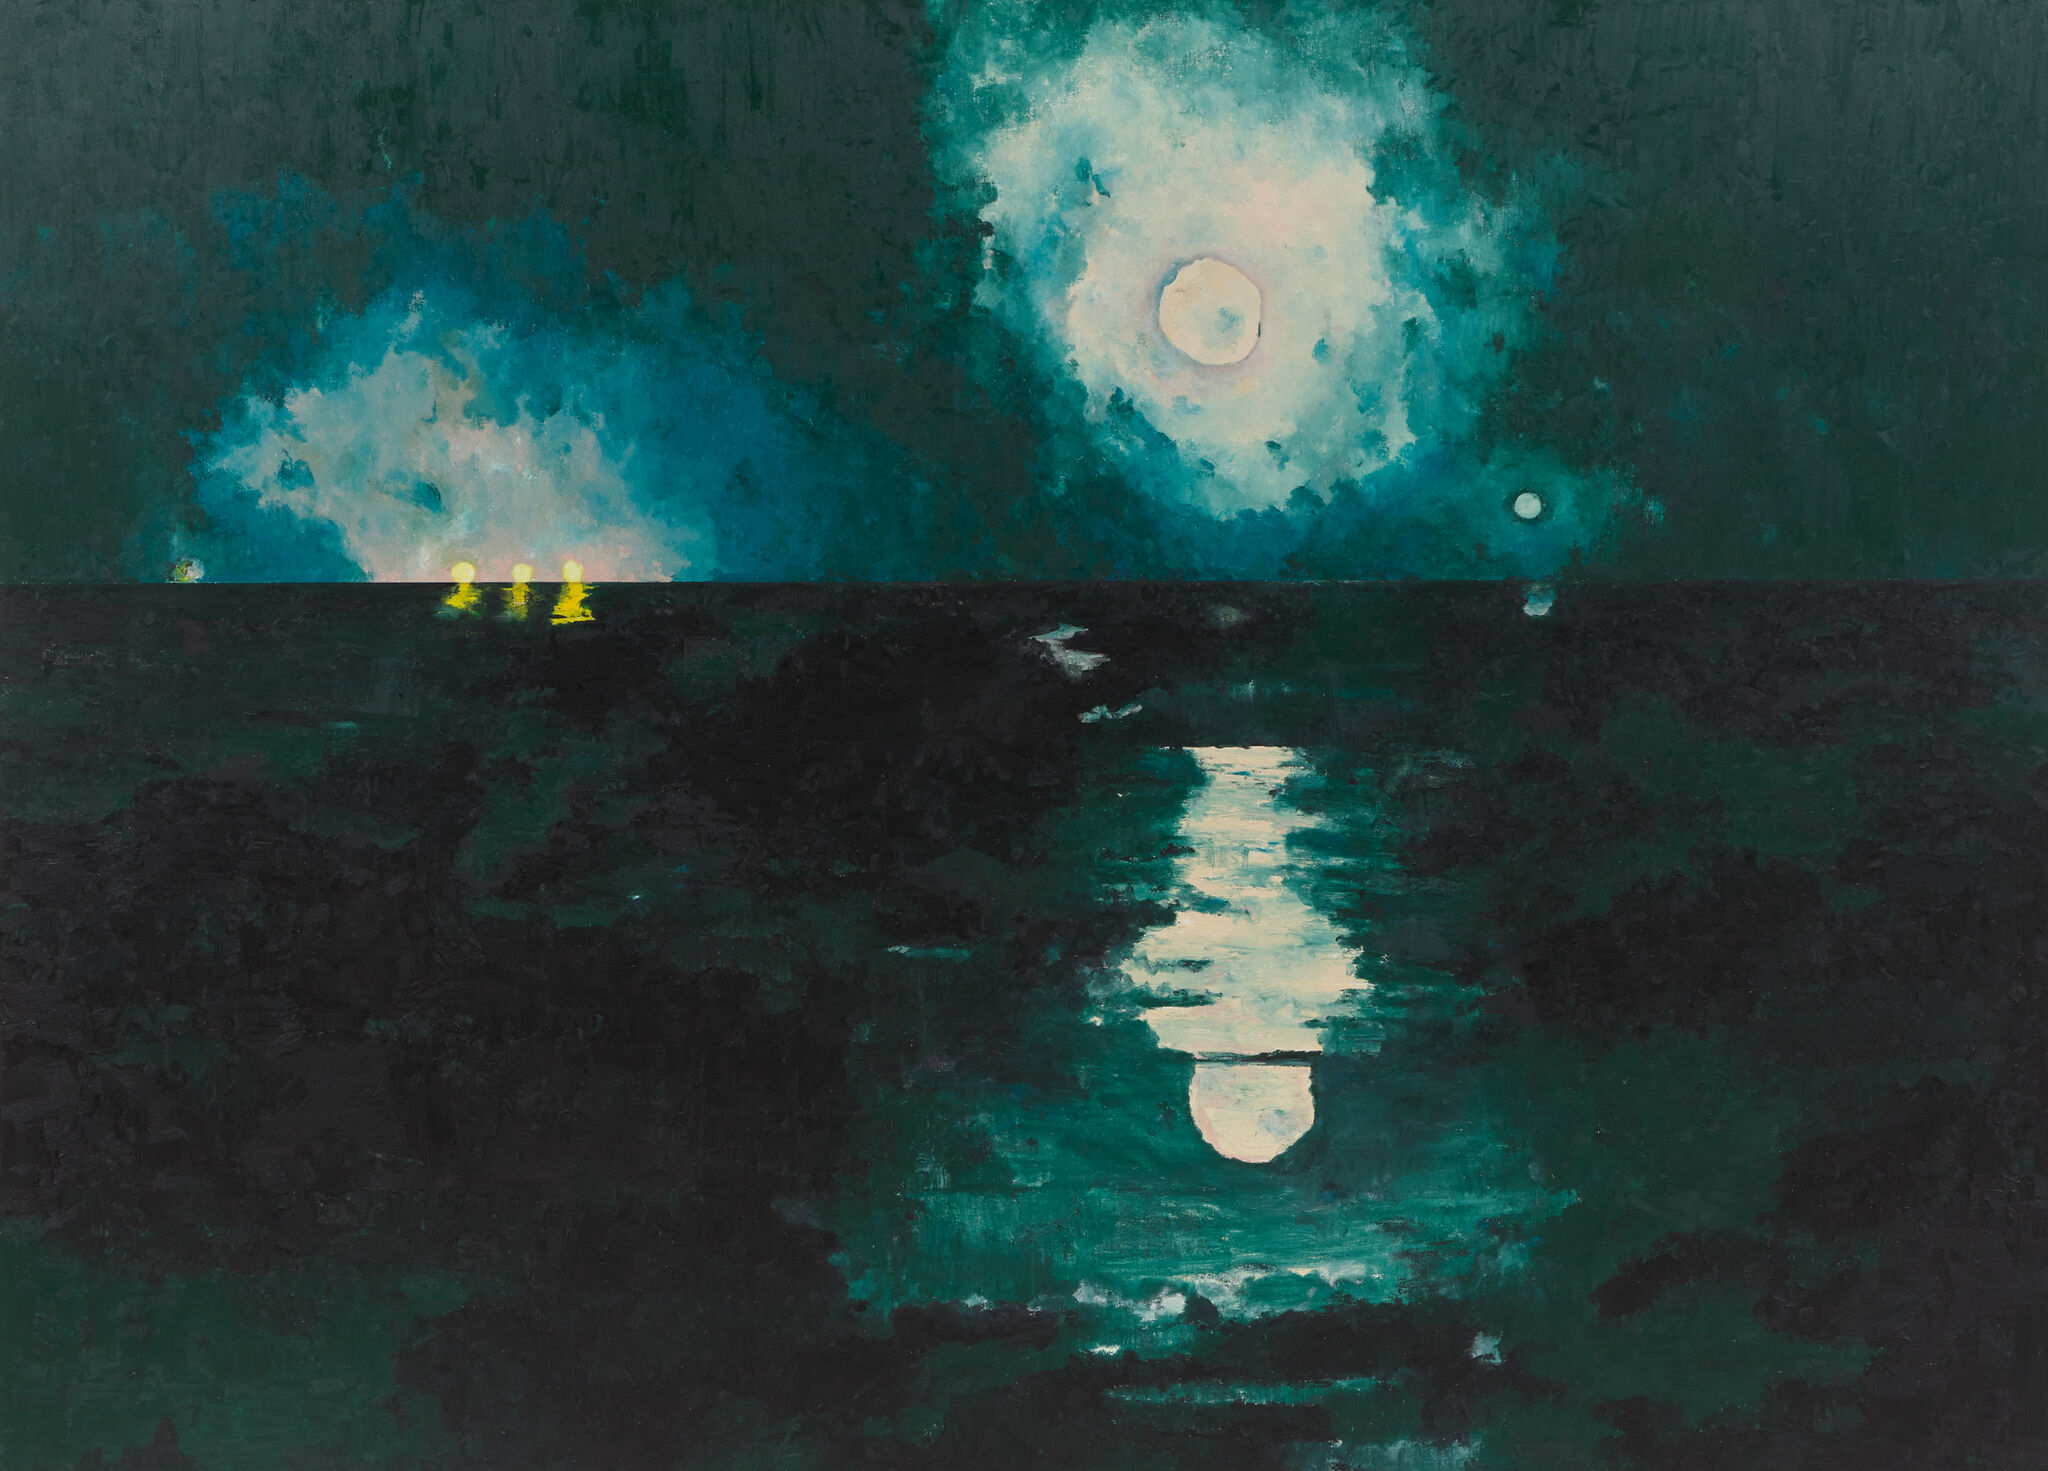 Painterly image of a moon reflected over a body of water, rendered in deep greens and blues, with three small, yellow lights on the horizon.